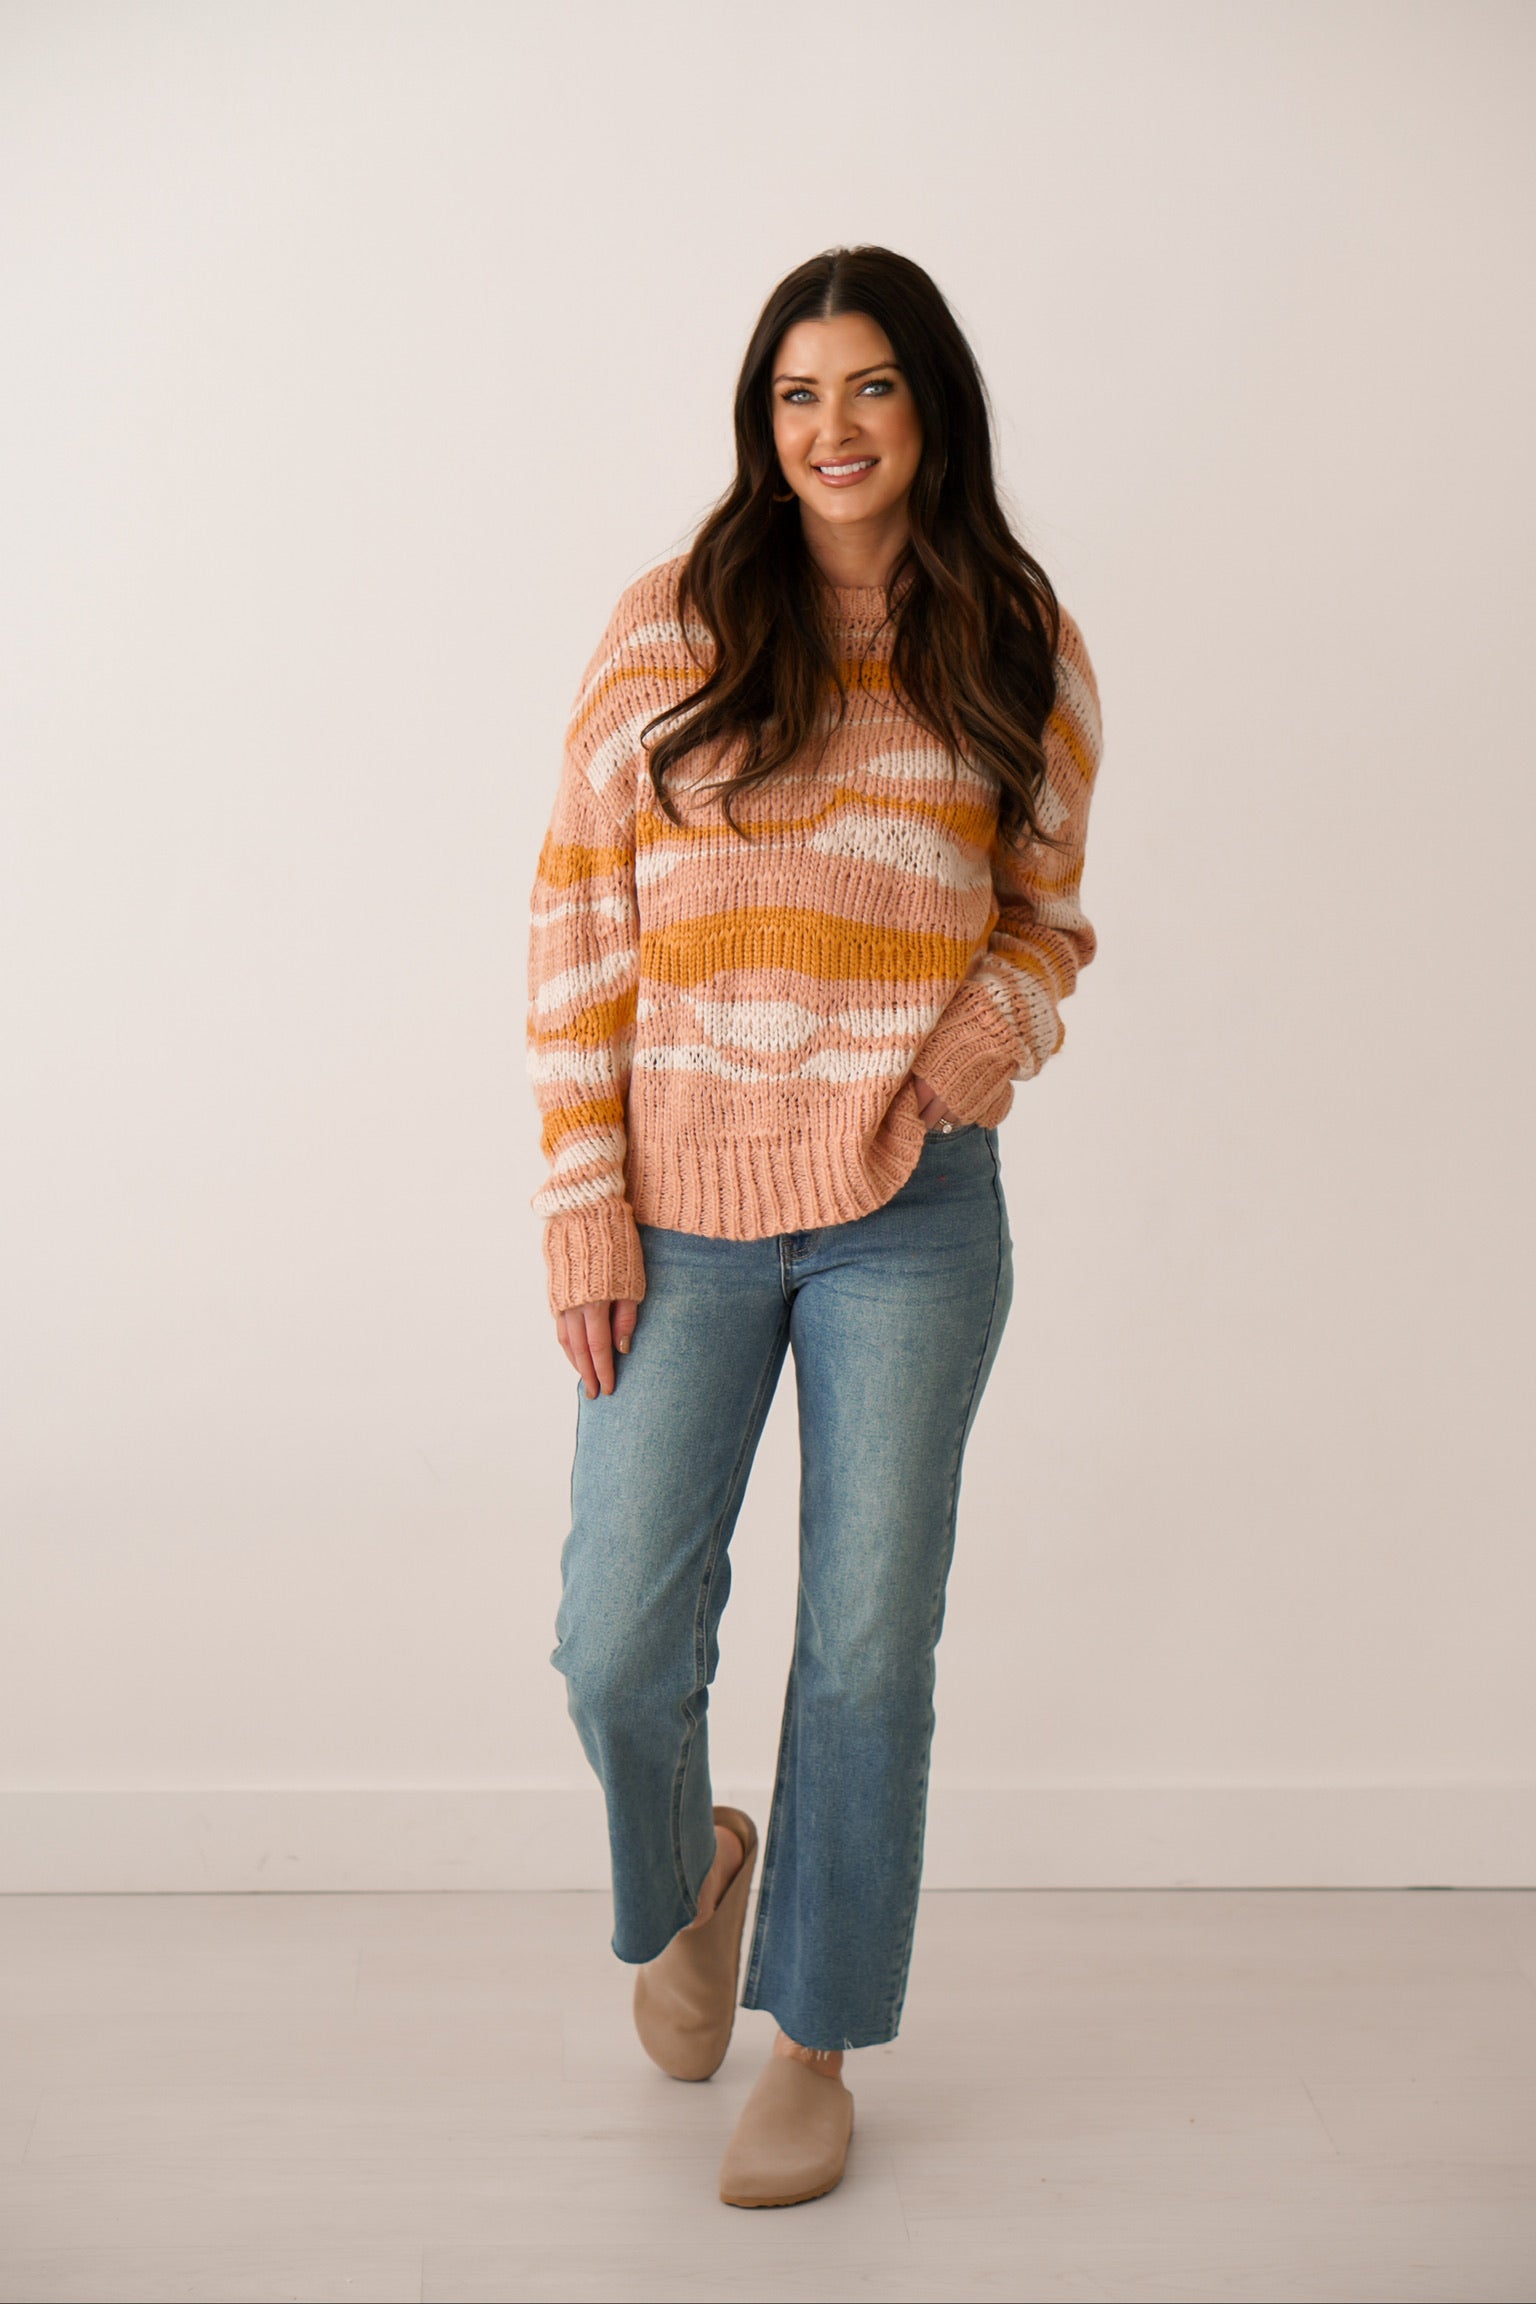 girl standing wearing sweater that is pink white and orange with a wavy landscape design to it with jeans and clogs